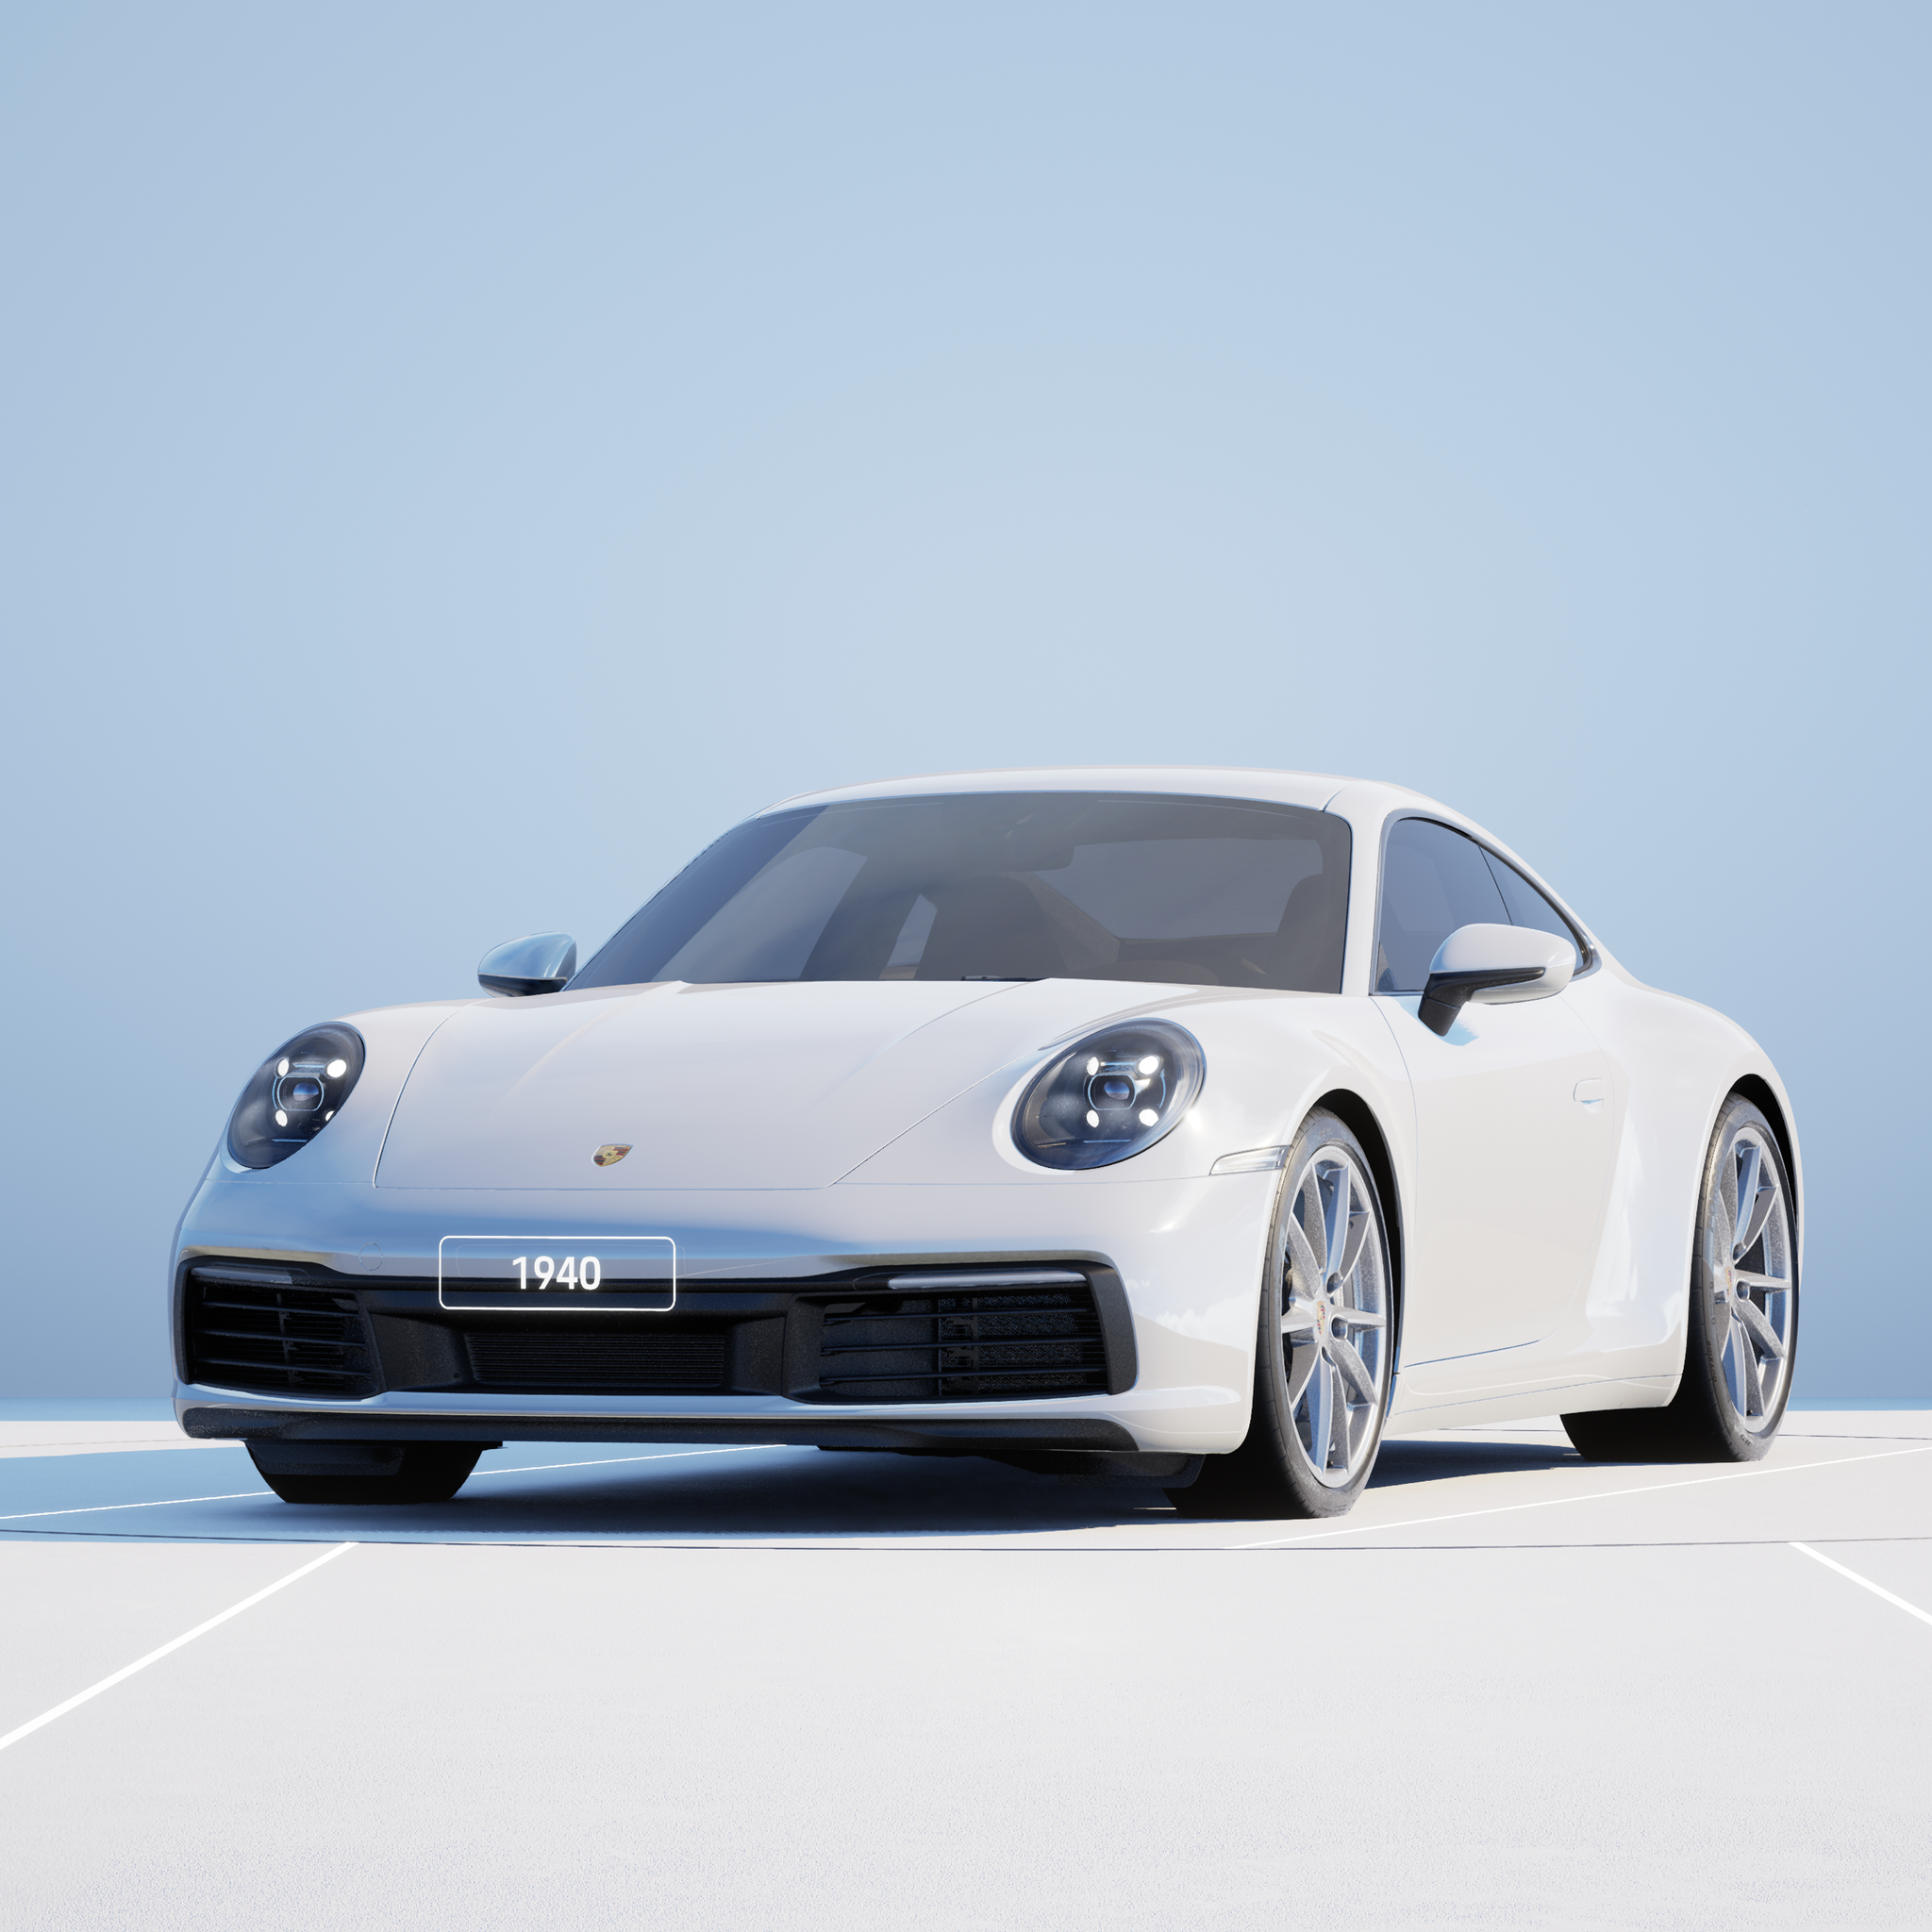 The PORSCHΞ 911 1940 image in phase